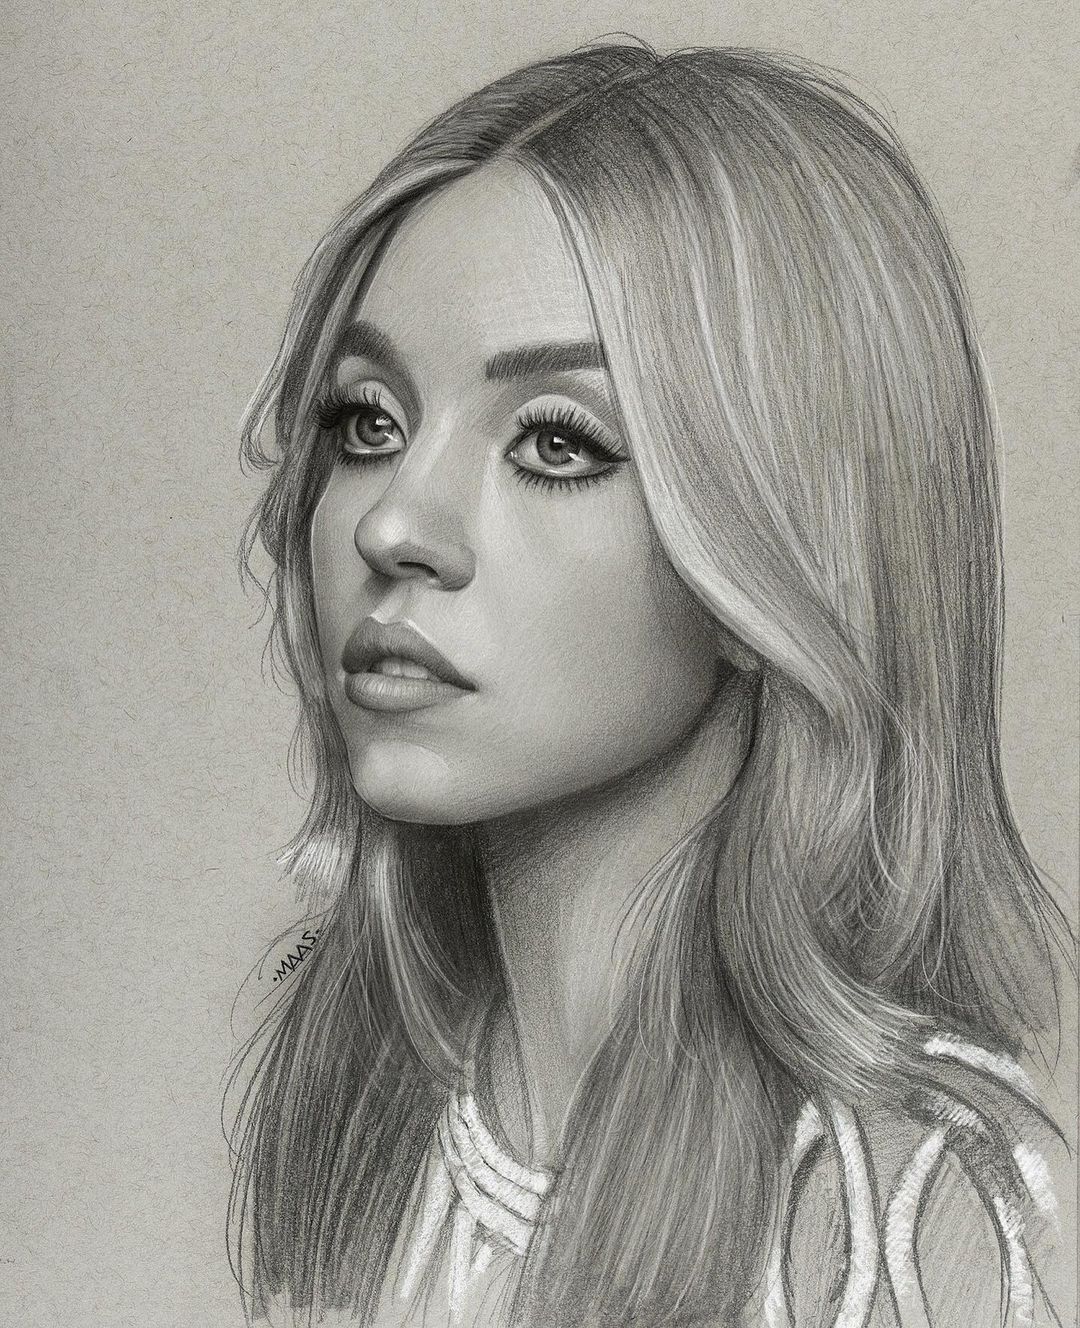 maas.art@instagram on Pinno: Happy Friday! My new drawing of ...